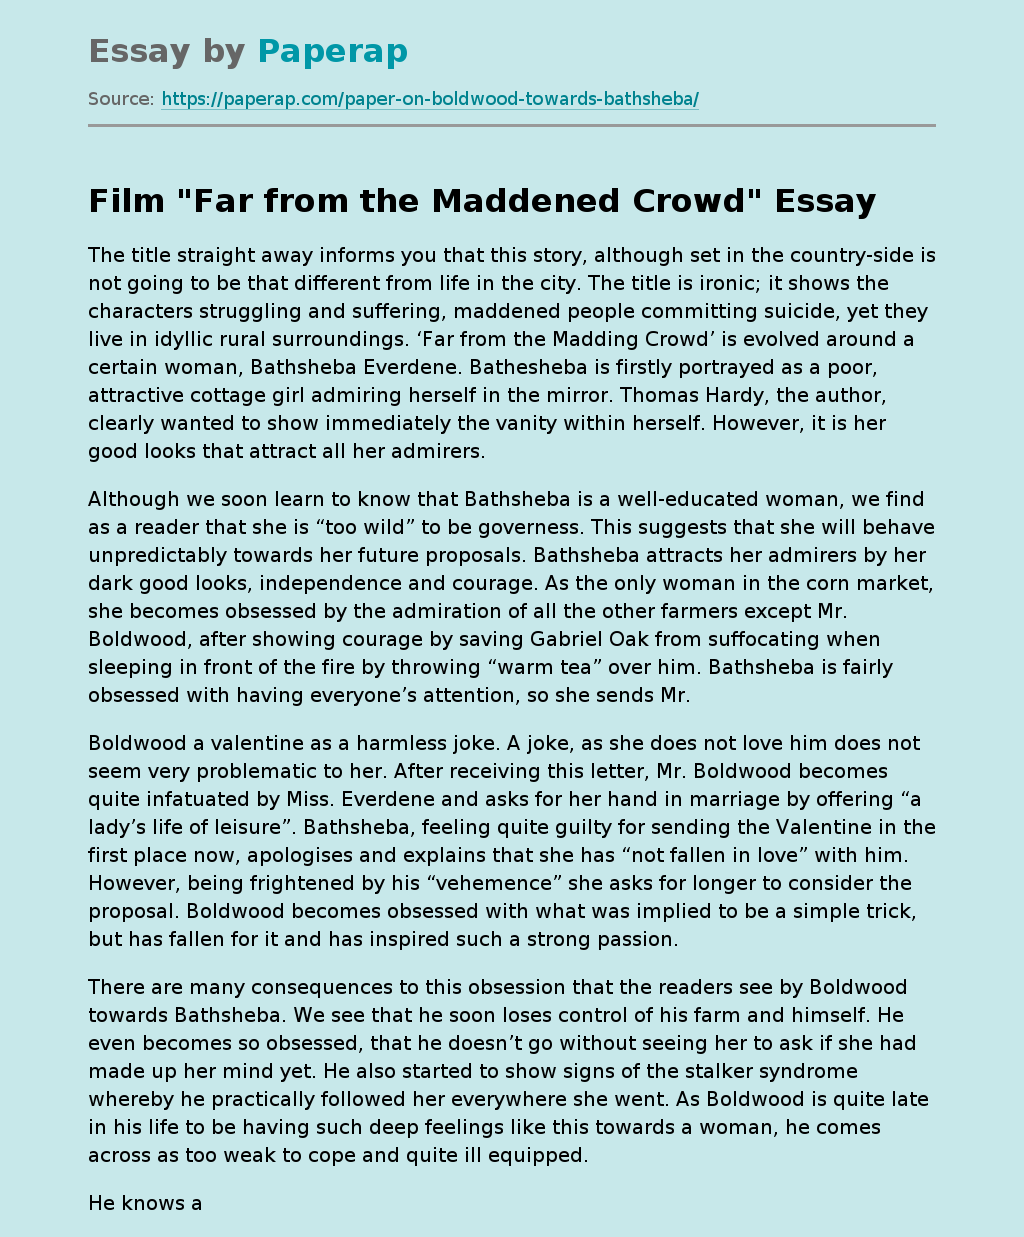 Film "Far from the Maddened Crowd"